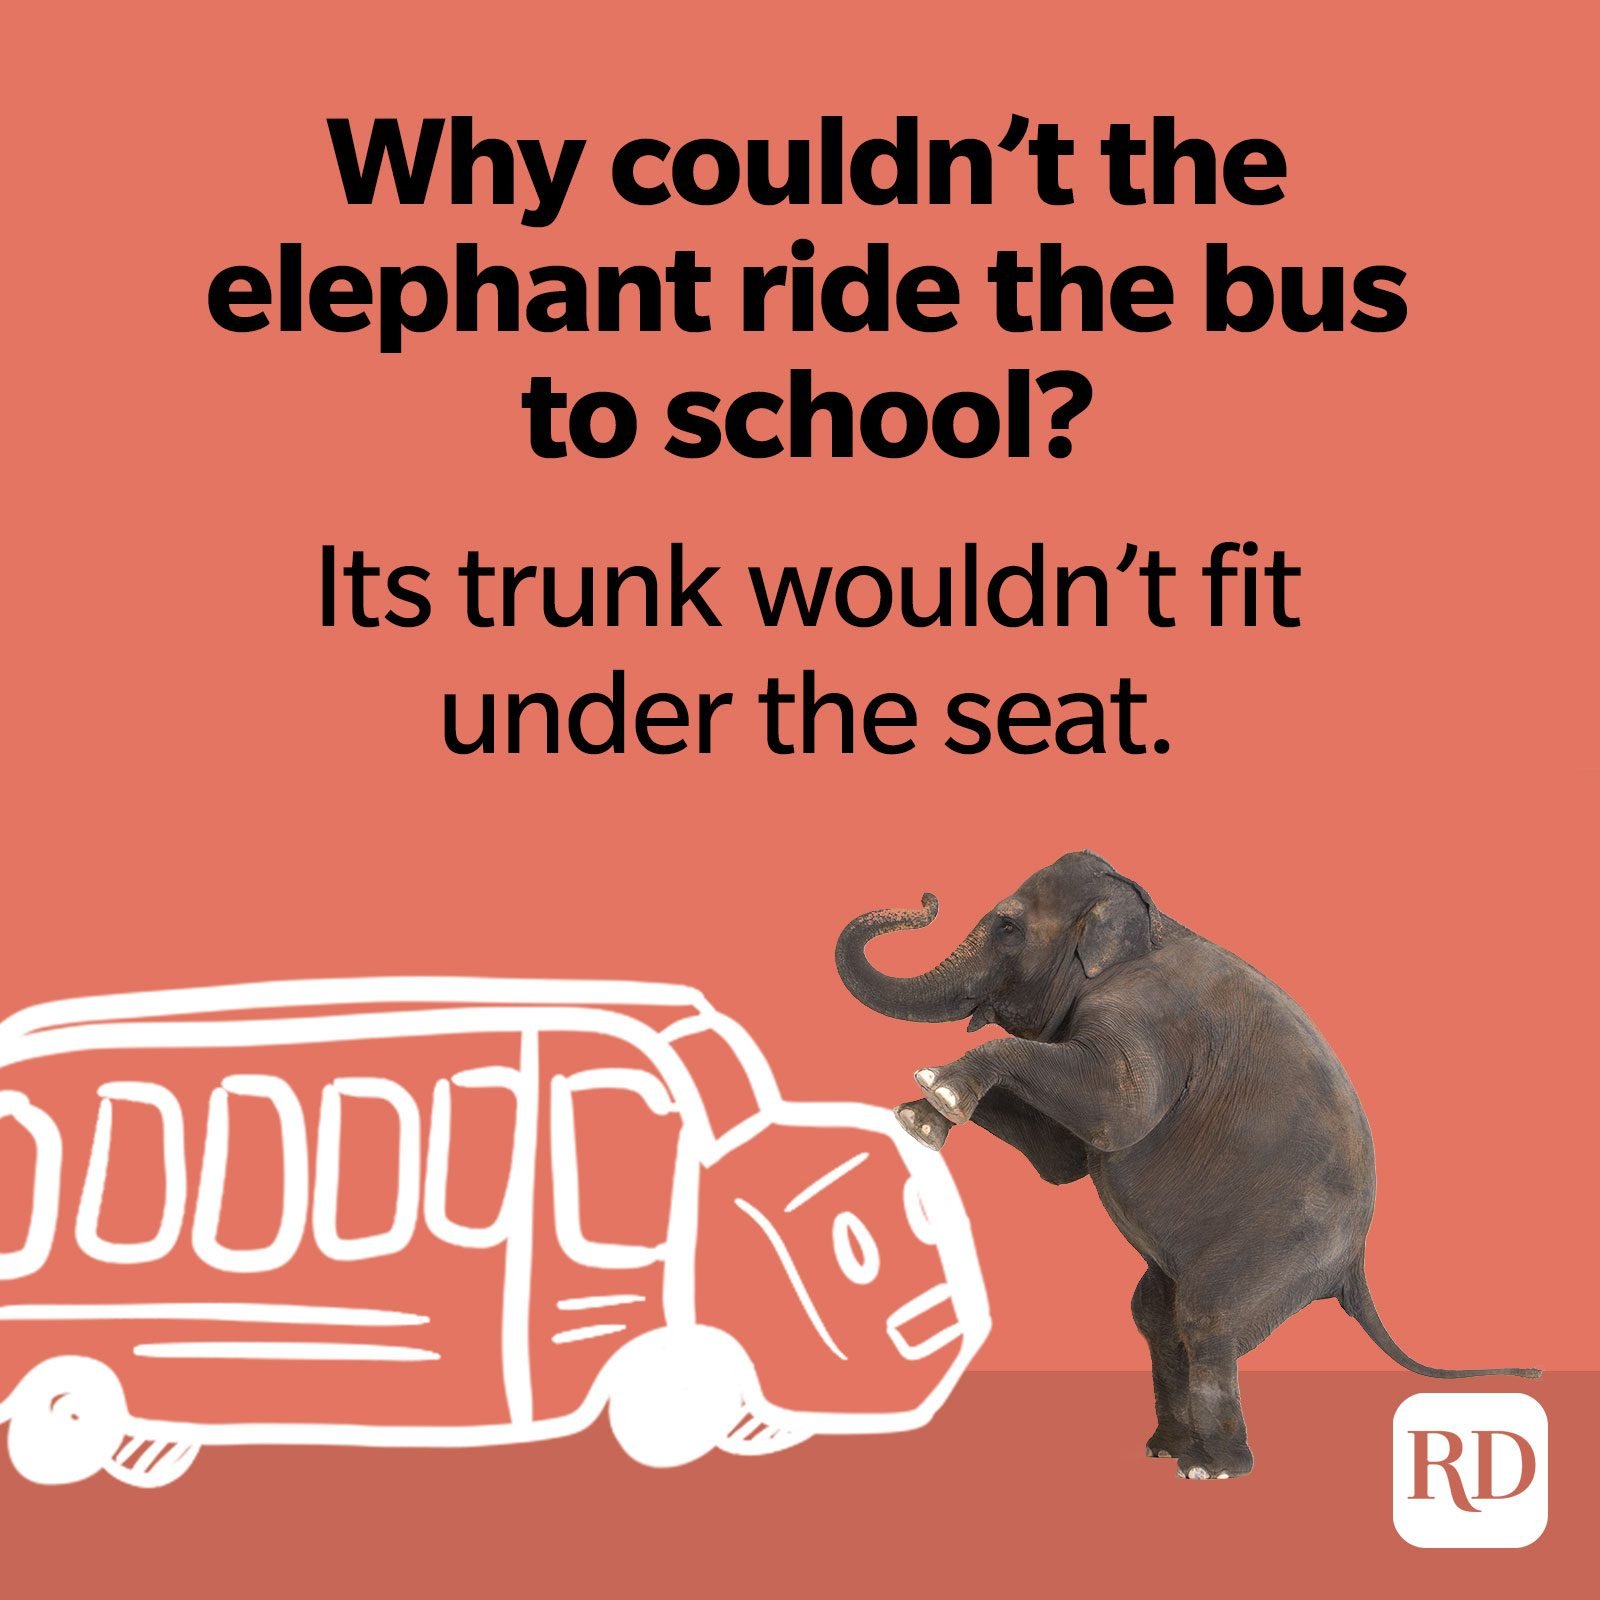 16. Why couldn't the elephant ride the bus to school? Its trunk wouldn't fit under the seat.